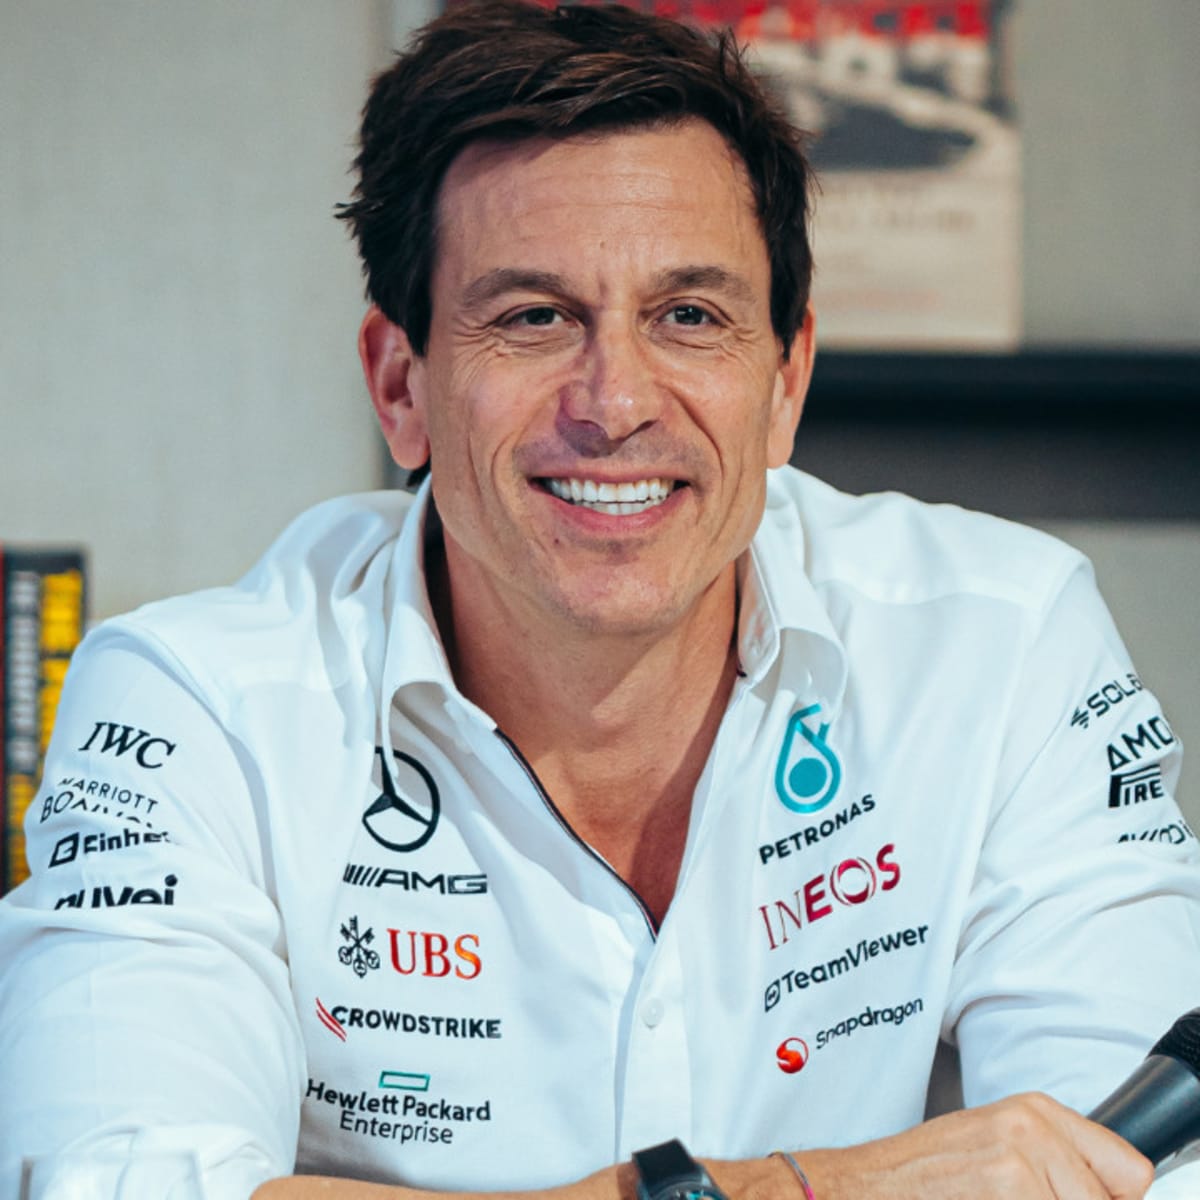 F1 News: Toto Wolff Angry Over FIA Defamation - "It has caused a lot of  damage" - F1 Briefings: Formula 1 News, Rumors, Standings and More